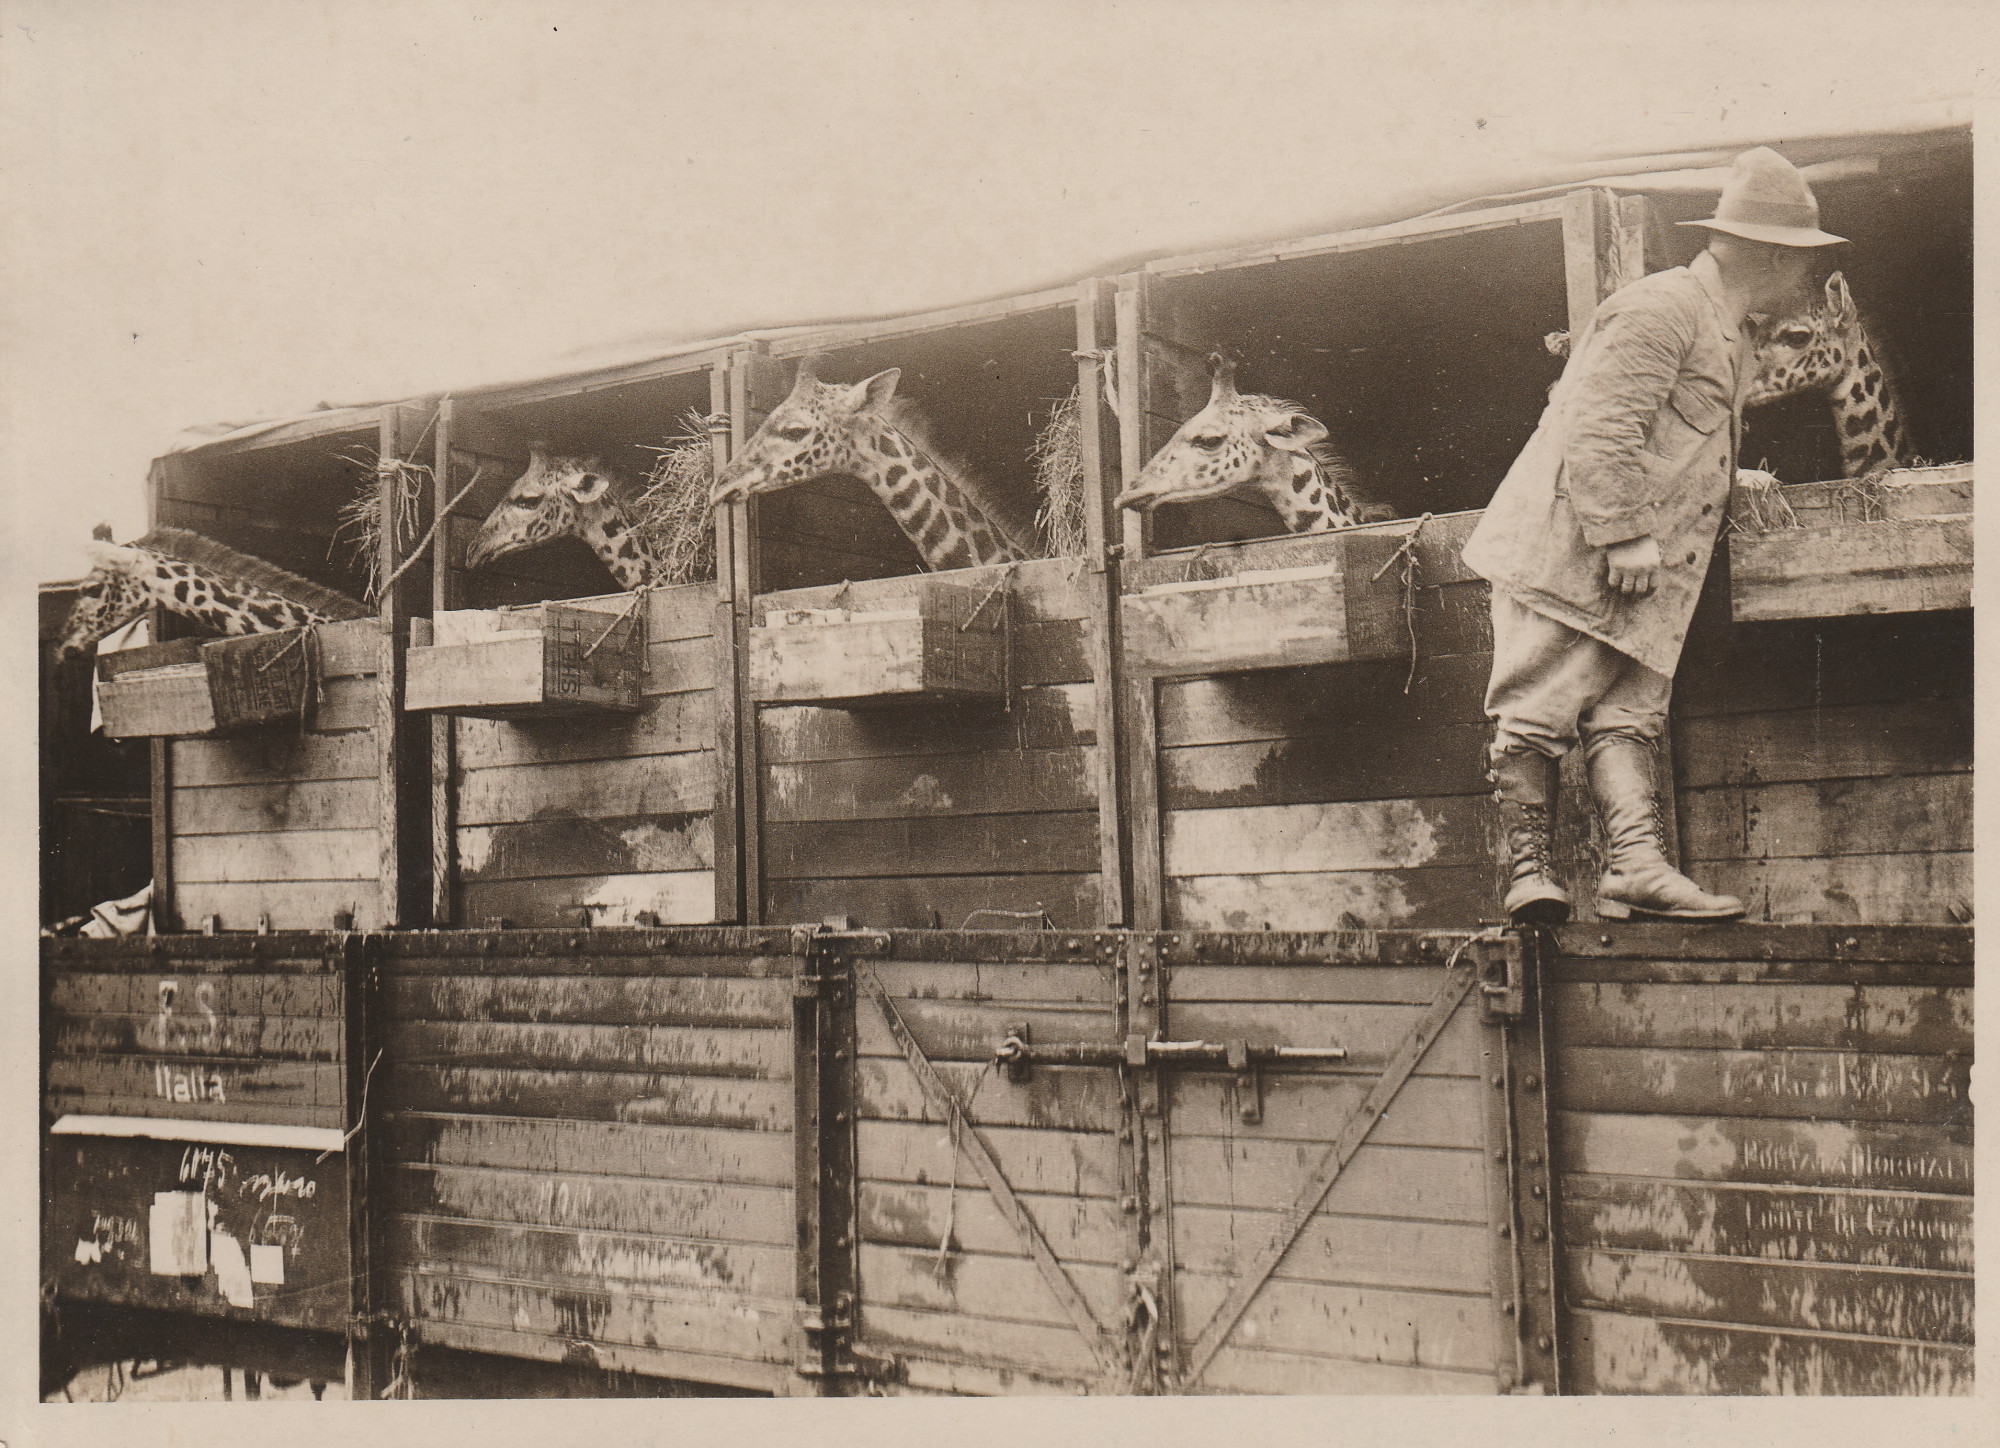 Black and white photograph: five giraffes stand peeking out of high transport crates. Person with pith helmet and high boots stands on a step attached to the crate on the far right and peers in next to a giraffe head.